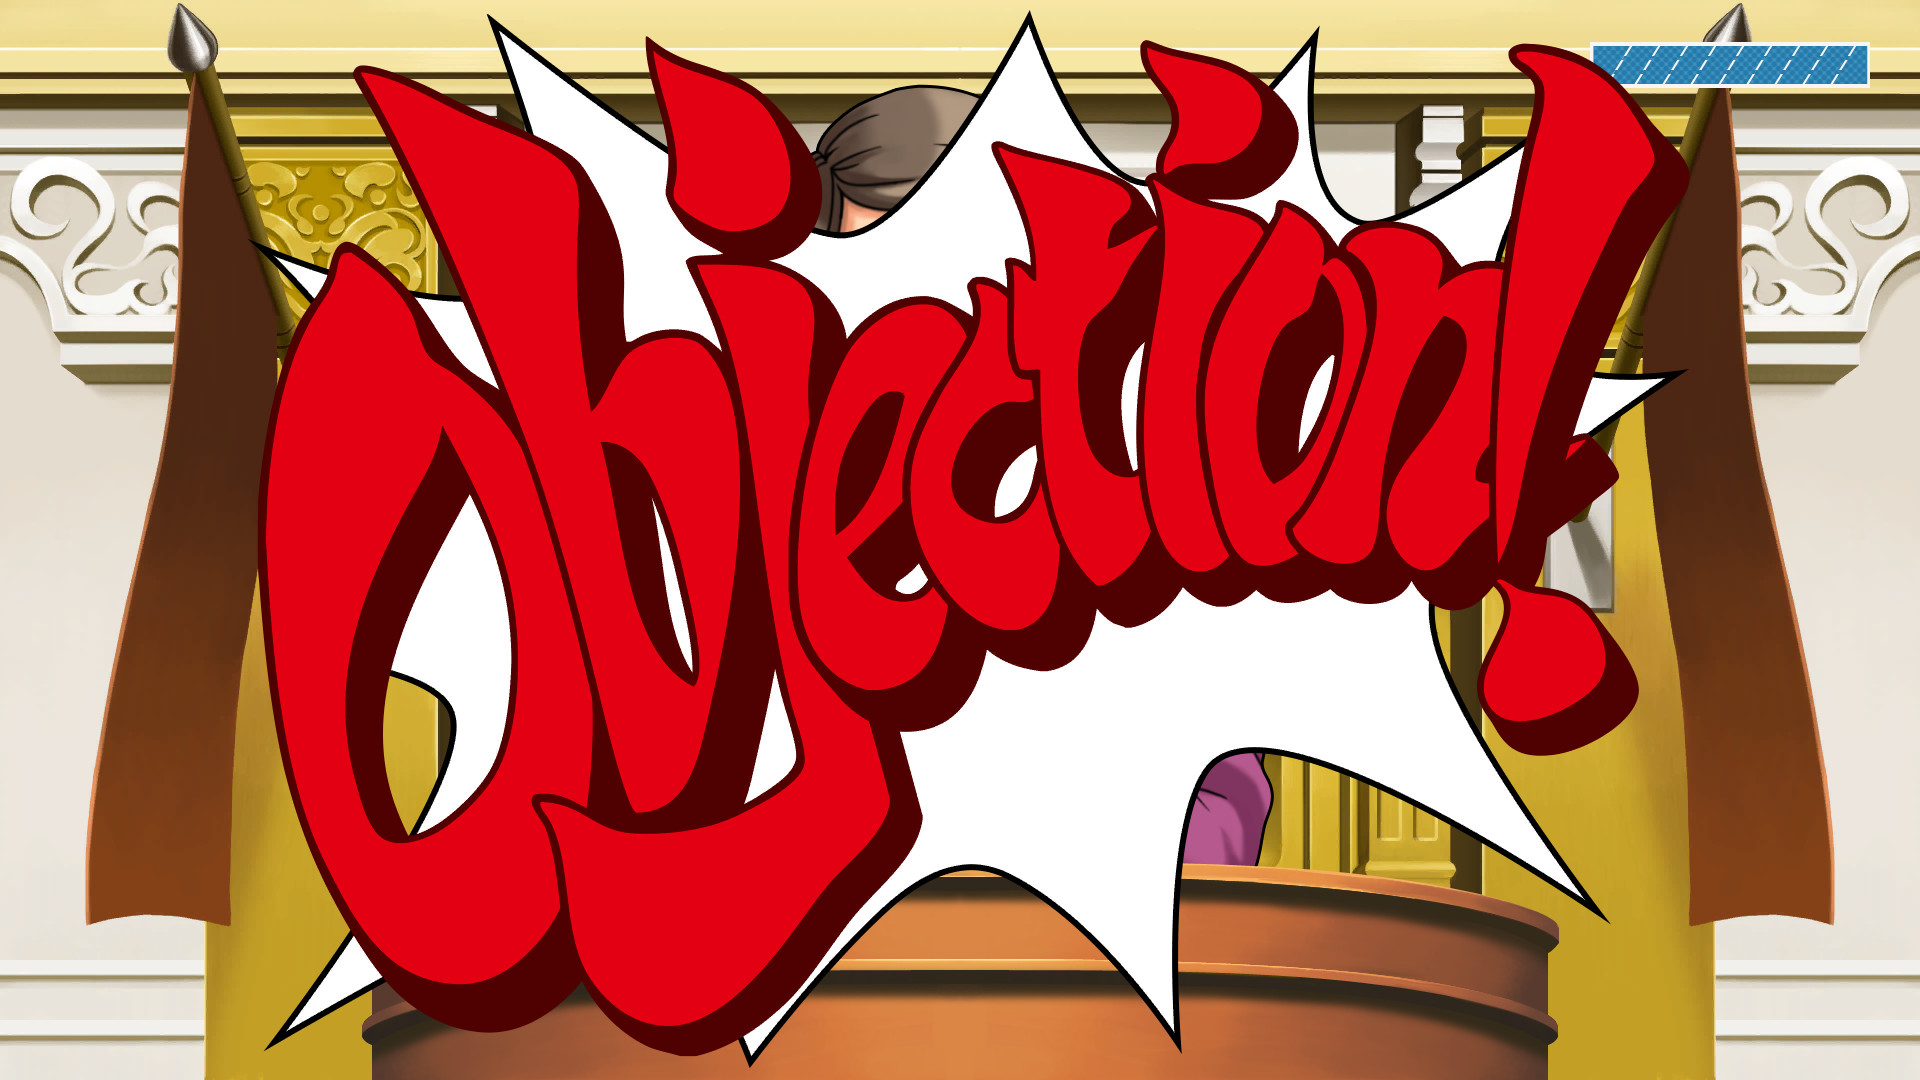 Phoenix Wright Ace Attorney Trilogy On Steam